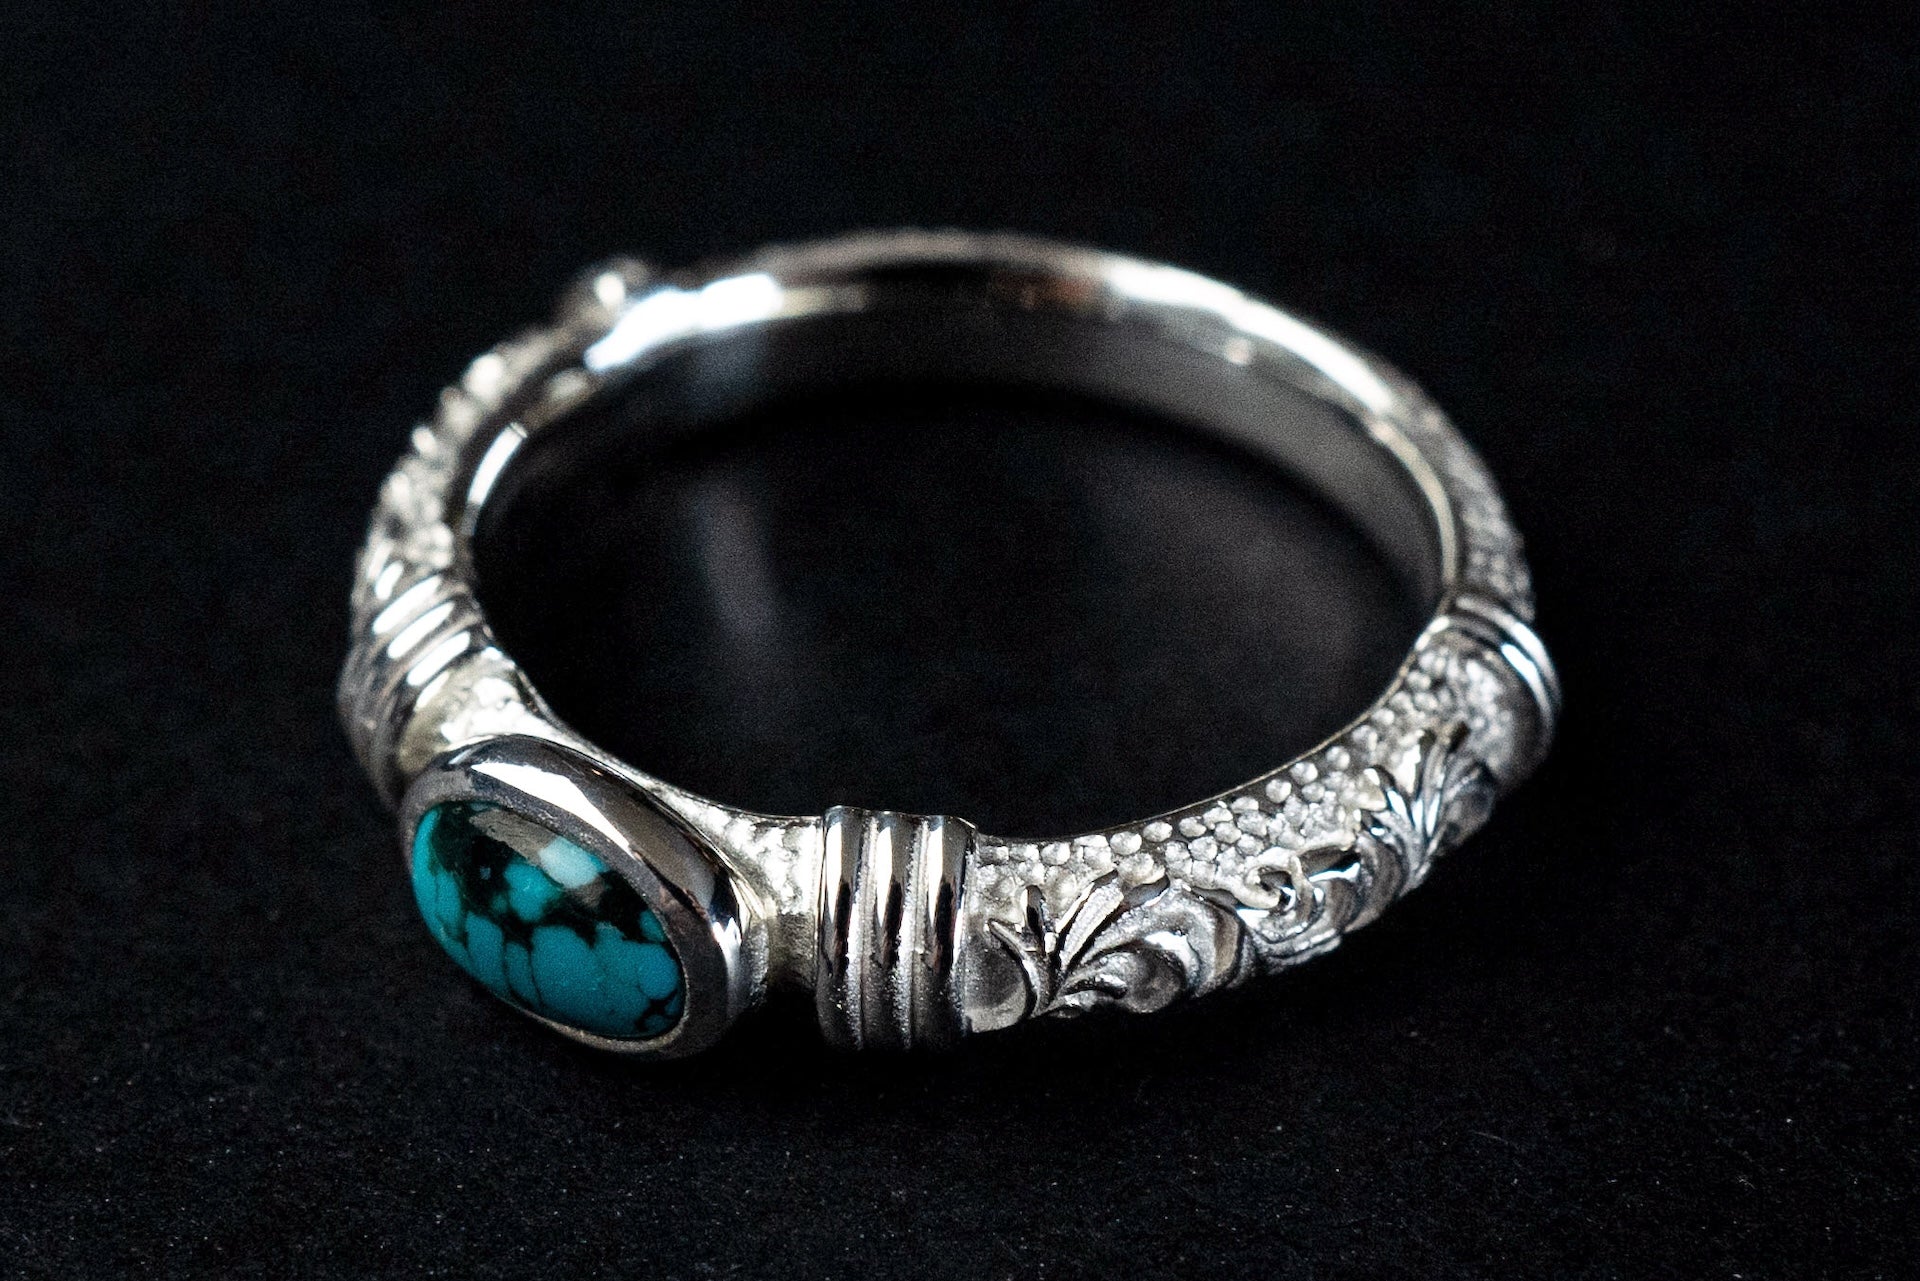 Legend Size Small "Anti-Ghost" Ring with Turquoise